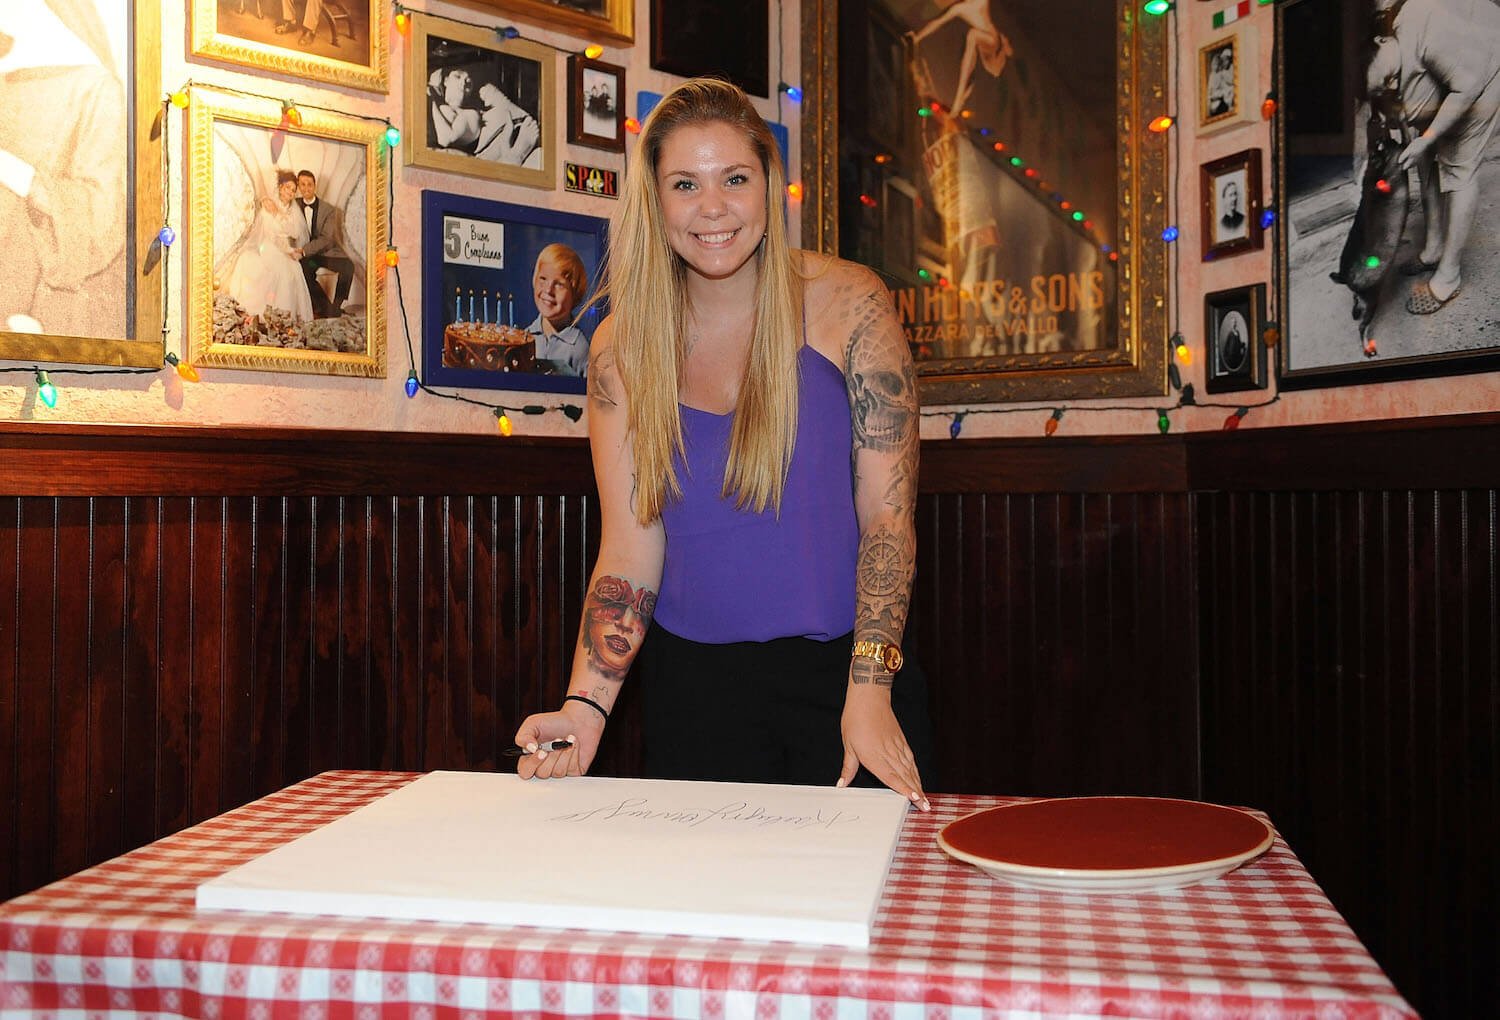 'Teen Mom 2' star Kailyn Lowry smiling at an event